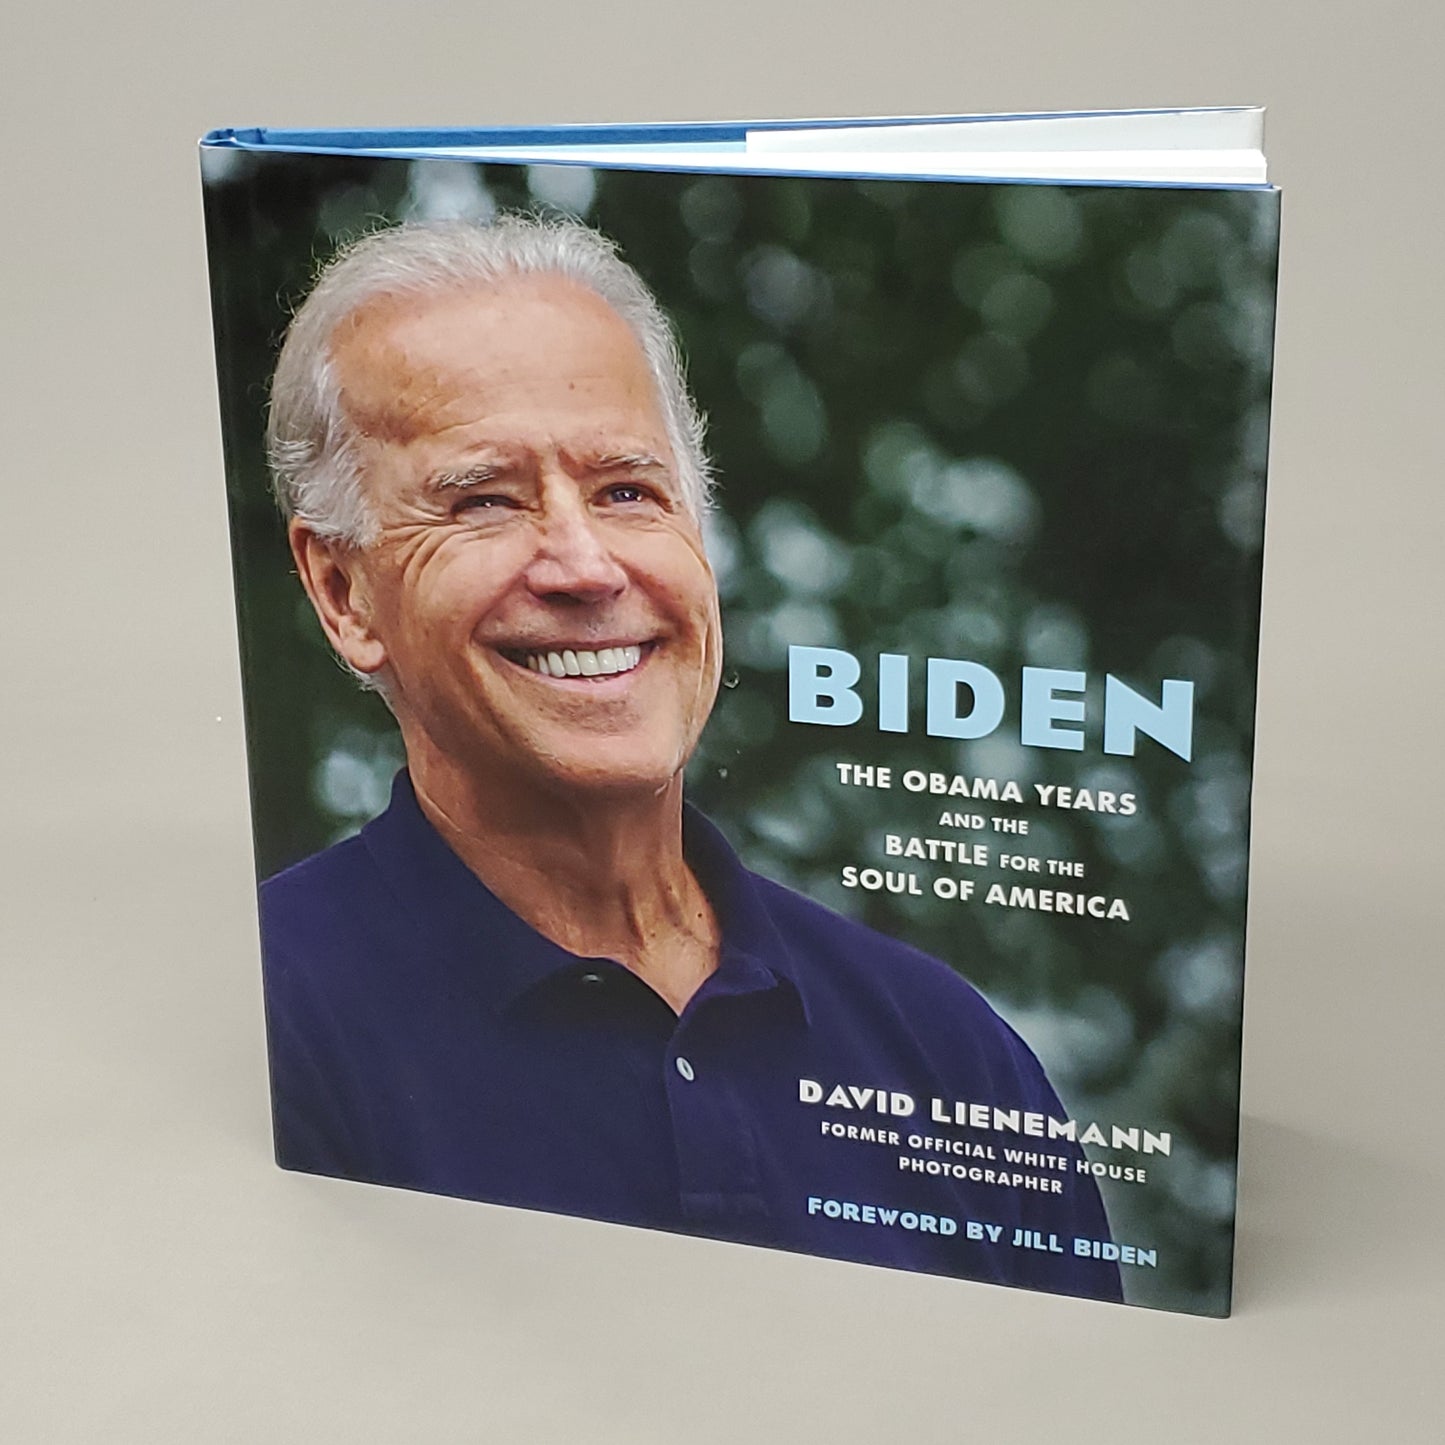 BIDEN: THE OBAMA YEARS & THE BATTLE FOR THE SOUL OF AMERICA by David Lienemann Book Hardback (New)